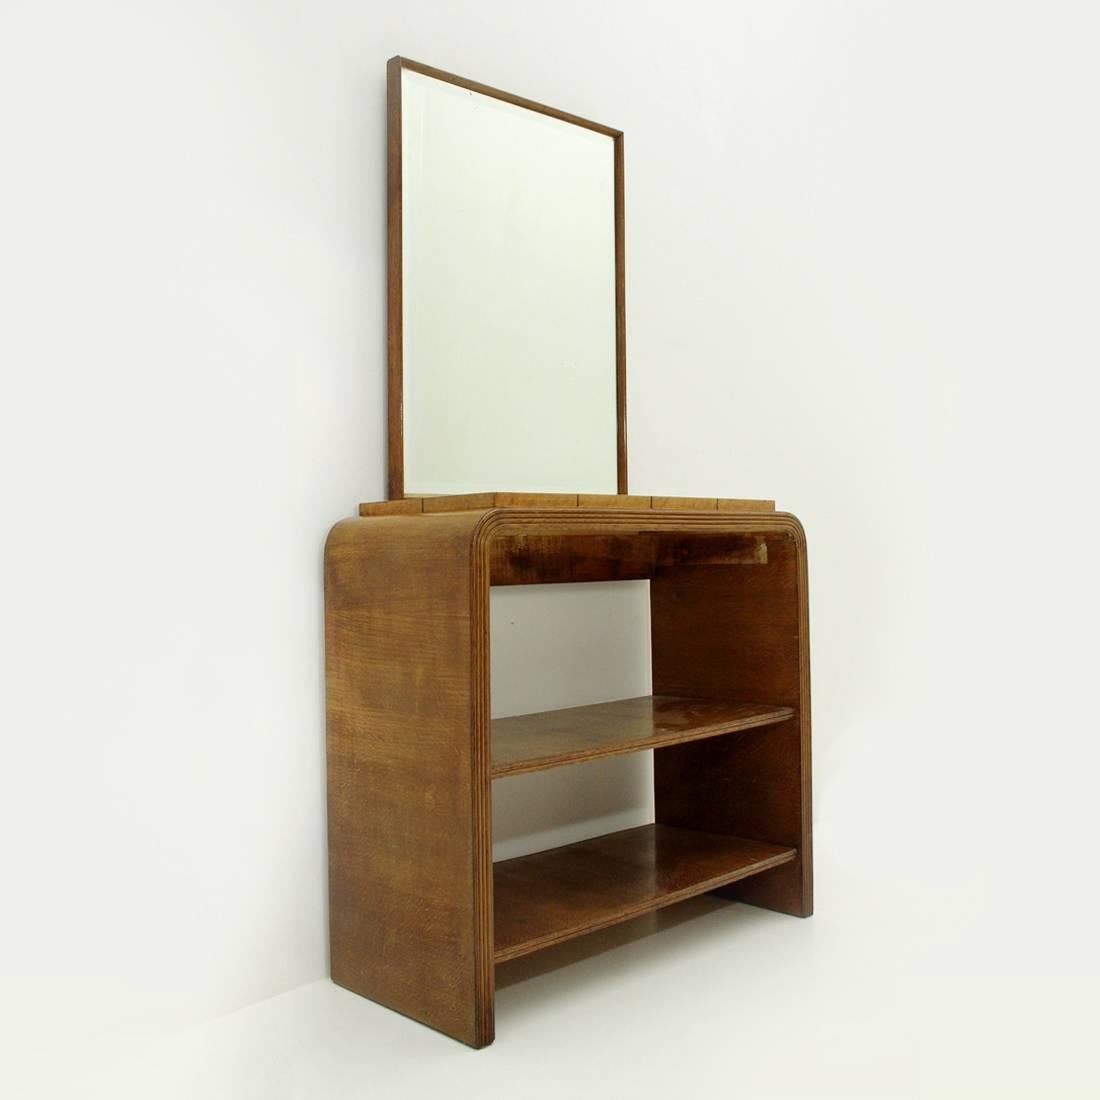 Italian console produced in the 1940s.
Structure with curved corners in veneered wood.
Raised top veneered with briar panels.
Grissinato front edge.
Two lower shelves.
Mirror with wooden frame with edges cut at 45°.
Structure in good